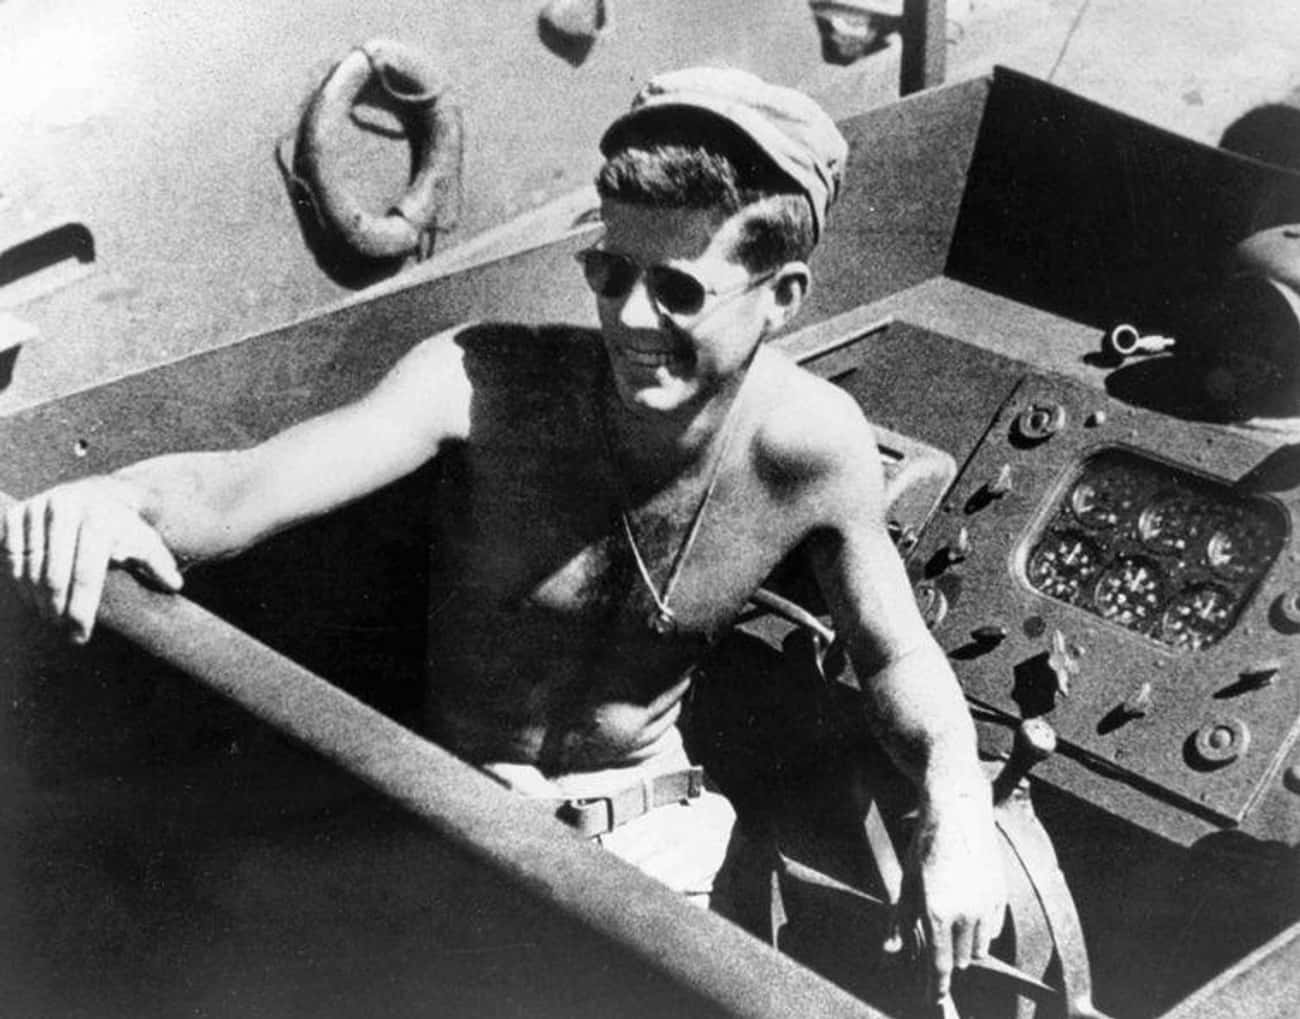 Lt. Kennedy's Boat Was Struck By A Japanese Destroyer - So He Sprang Into Action